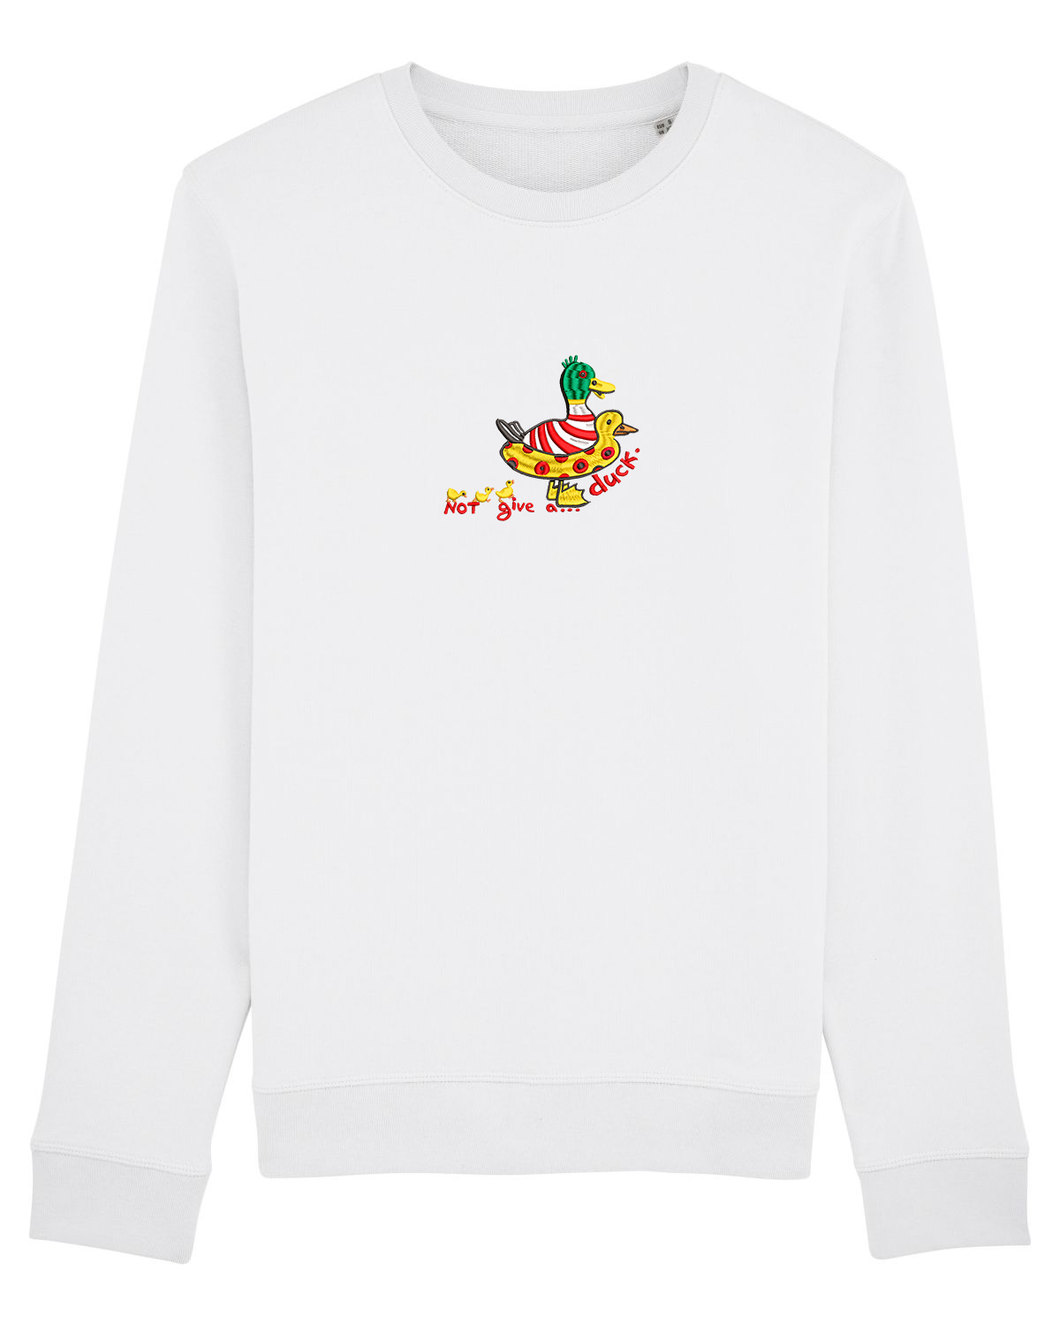 Not give a...duck. 🦆 - Embroidered UNISEX CREWNECK SWEATSHIRT